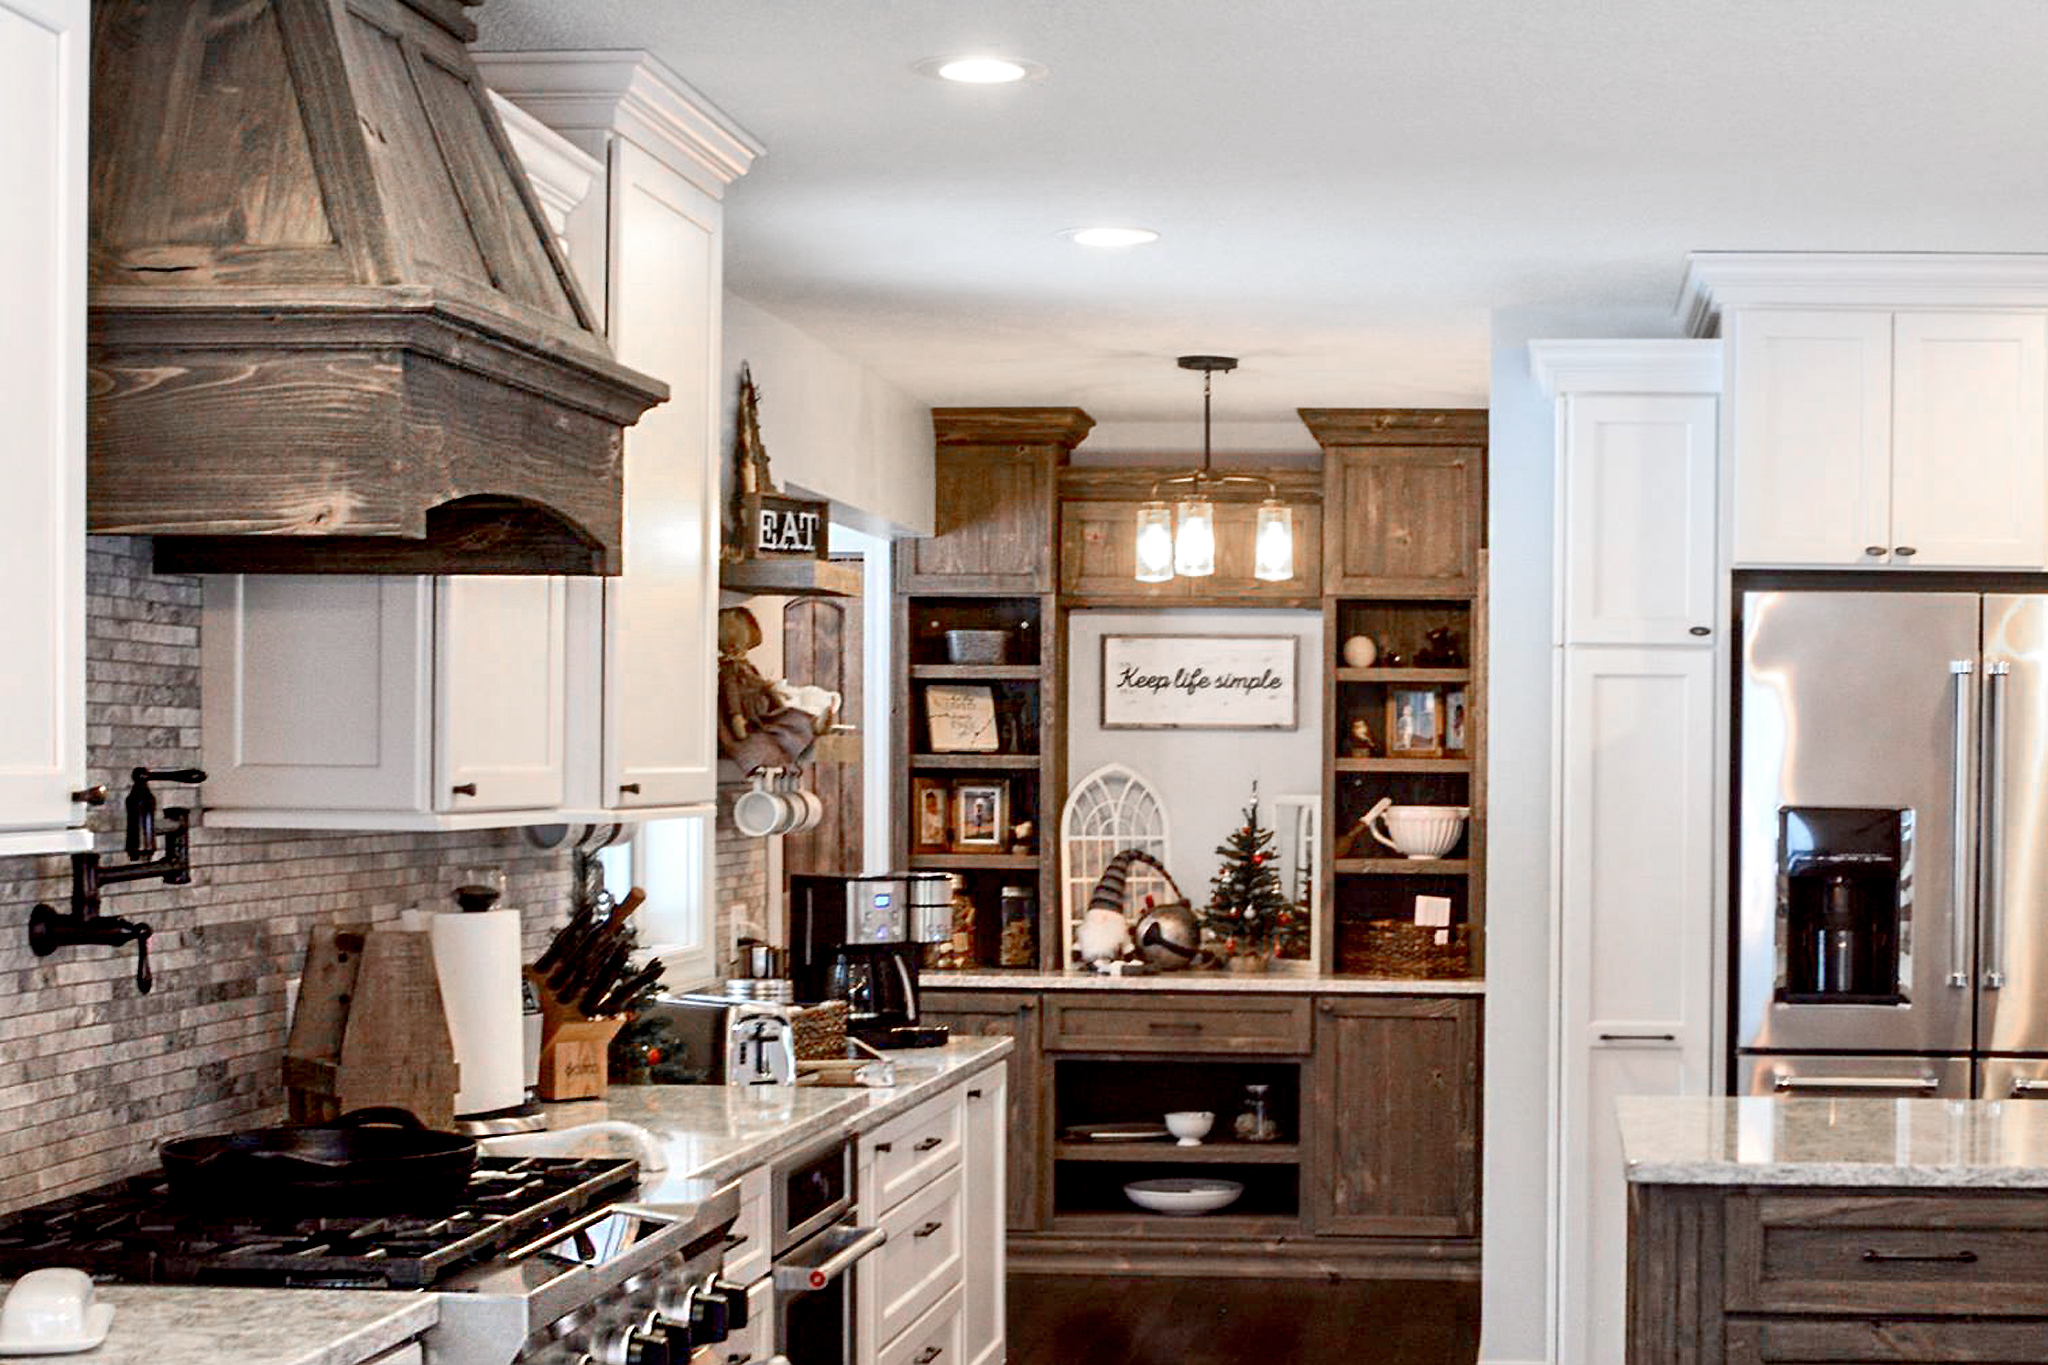 What is the best quality cabinet? Hear cabinetry reviews and testimonies from homeowners about the quality of their Dura Supreme Cabinetry, like this kitchen remodel story with white painted kitchen cabinets and rustic weathered wood accents.